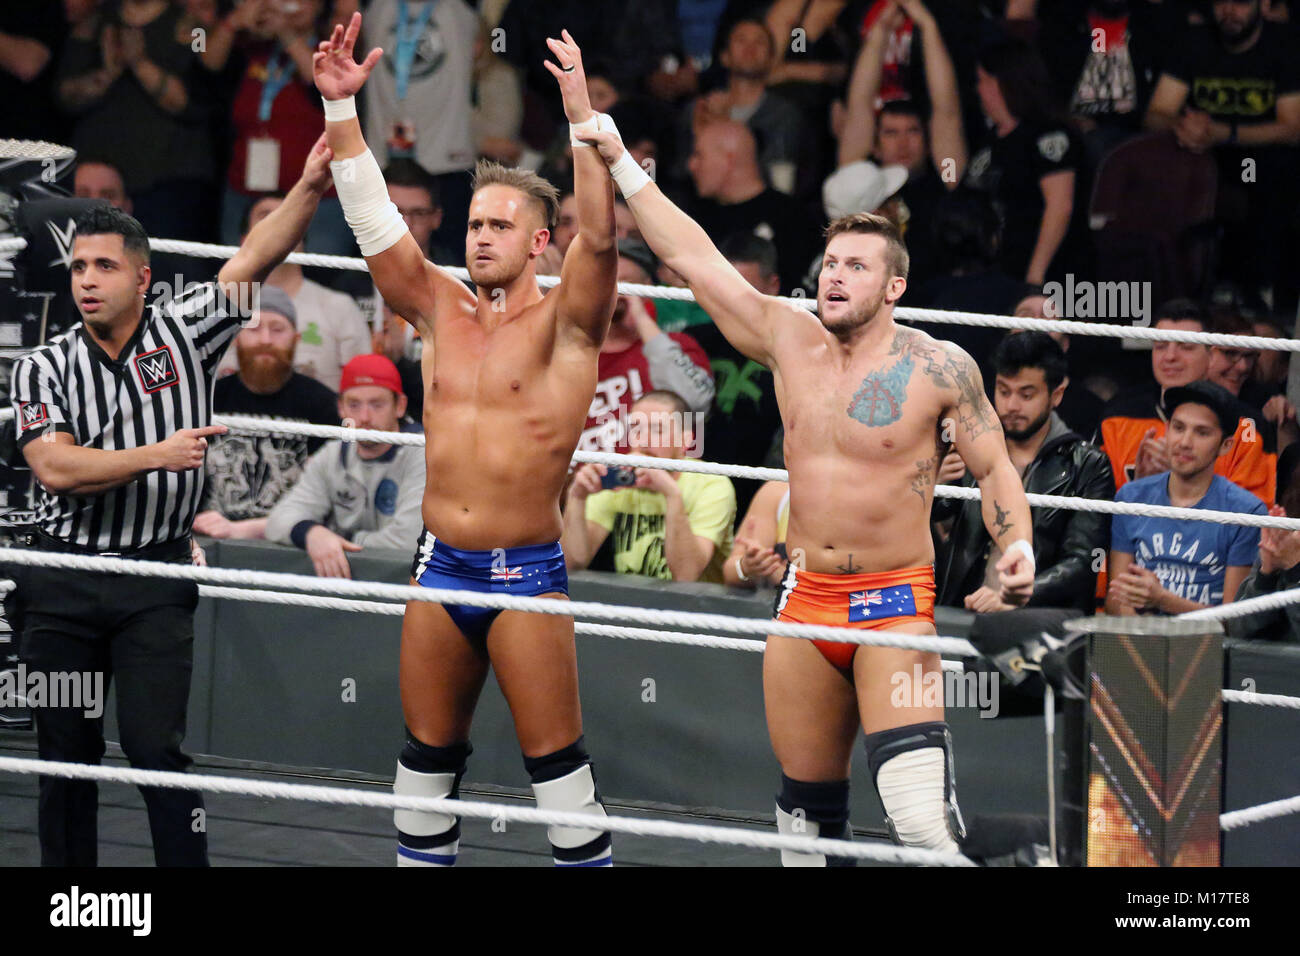 Philadelphia, PA, USA. 27th Jan, 2018. TM61 wins match at WWE NXT Take Over at Wells Fargo Center in Philadelphia, Pa on January 27, 2018 Credit: Star Shooter/Media Punch/Alamy Live News Stock Photo